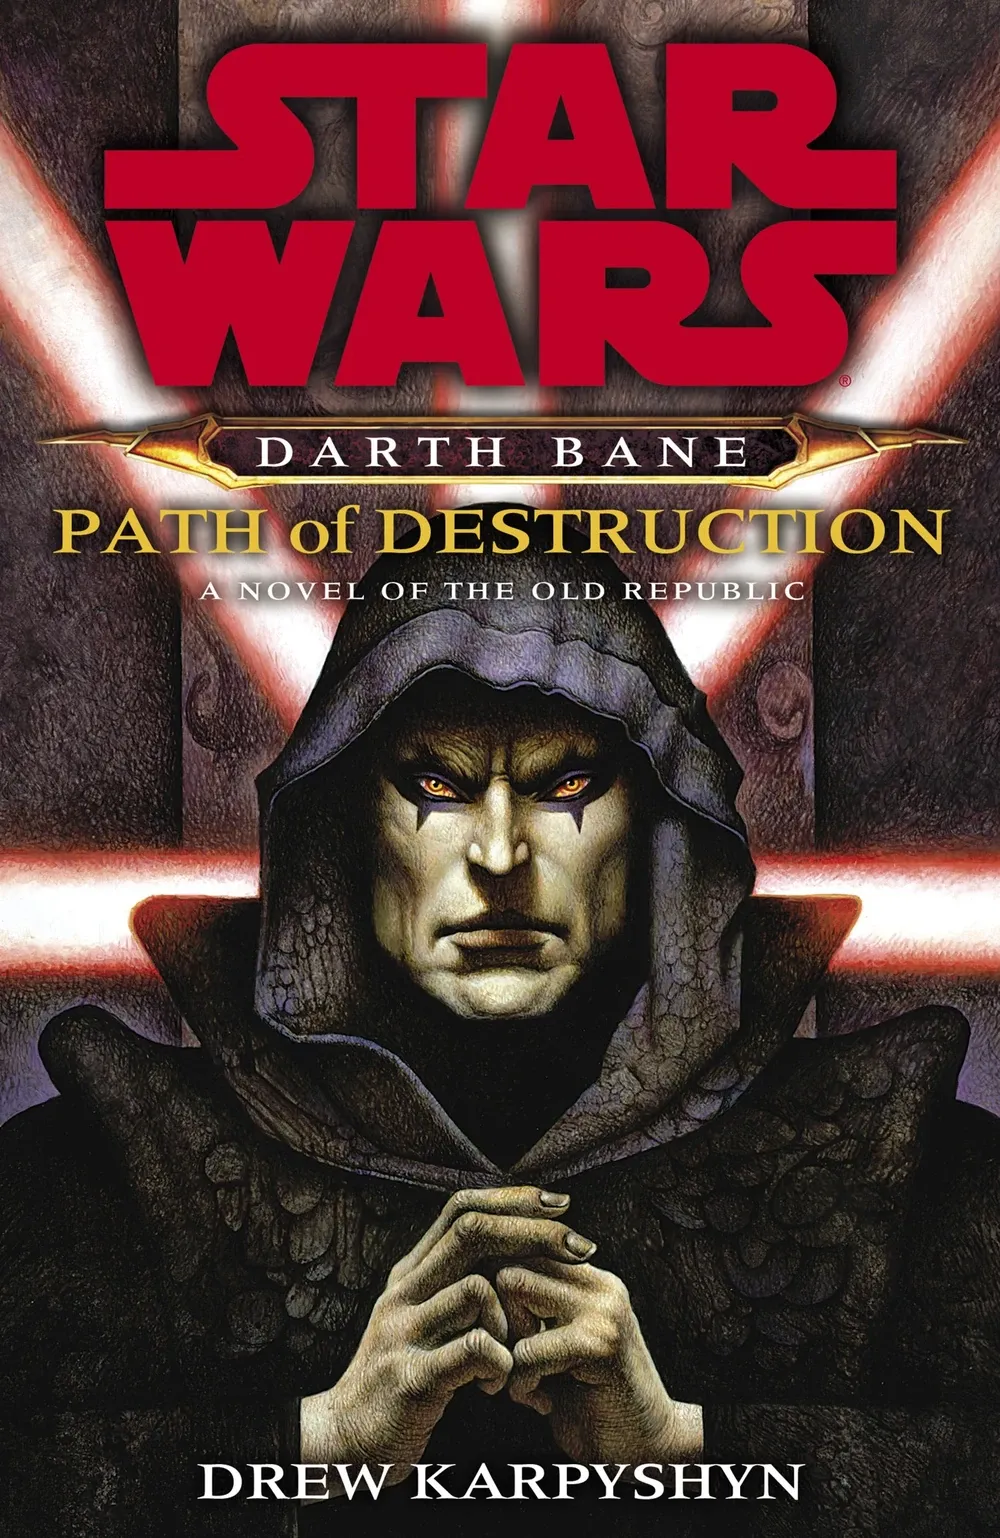 Book Review | The Darth Bane Trilogy